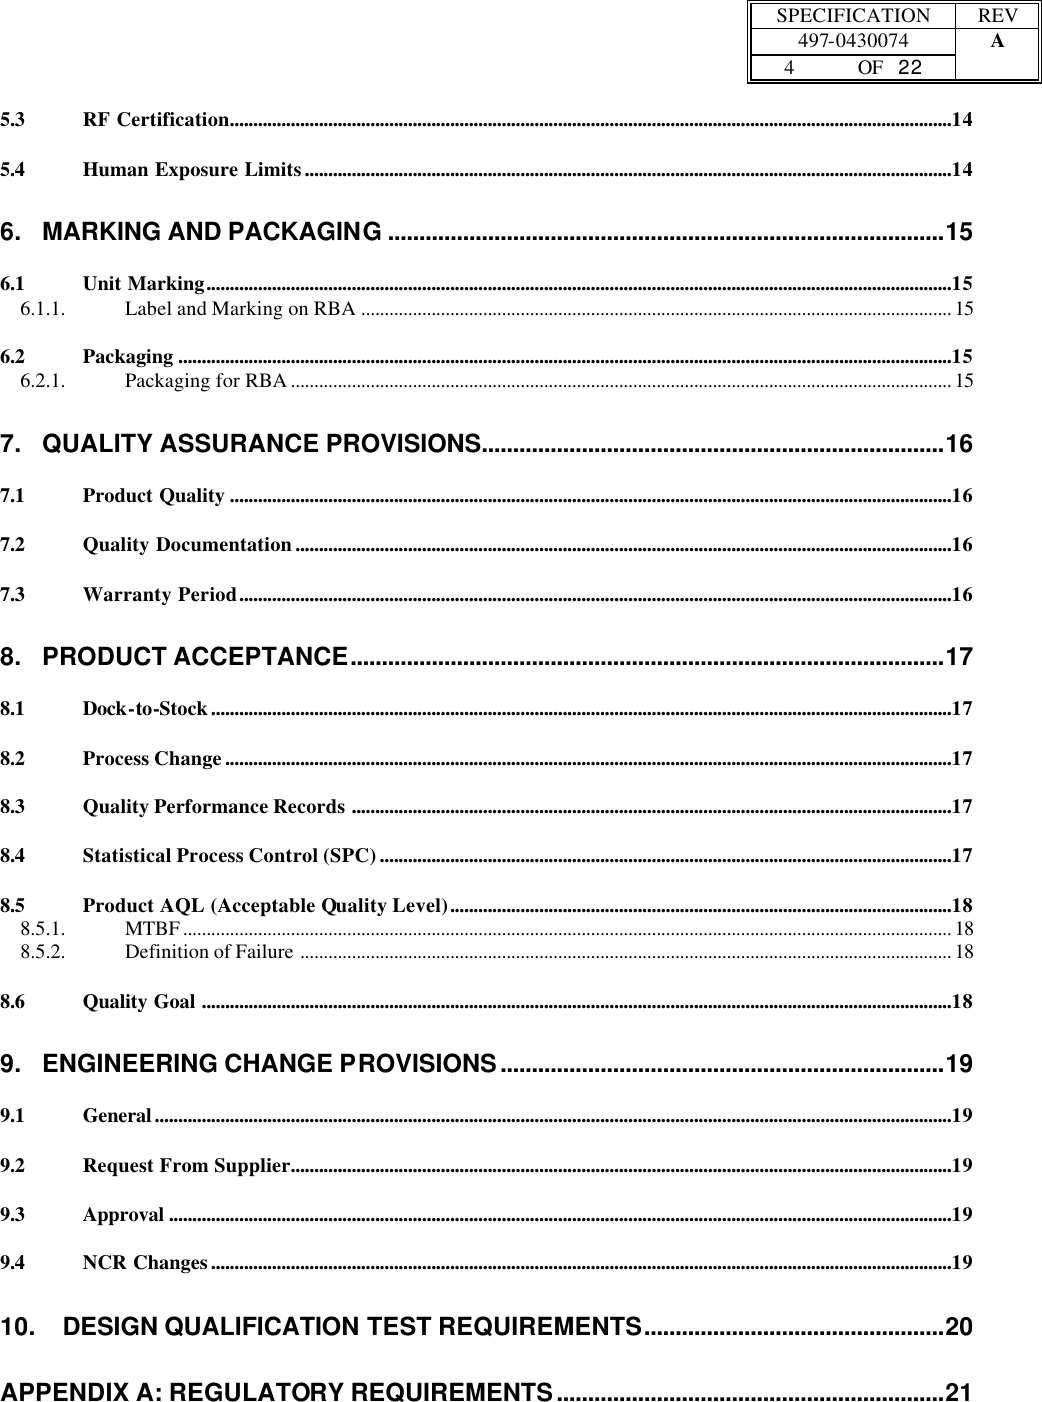  SPECIFICATION REV  497-0430074 A  4 OF   22    5.3 RF Certification..........................................................................................................................................................14 5.4 Human Exposure Limits..........................................................................................................................................14 6. MARKING AND PACKAGING .........................................................................................15 6.1 Unit Marking...............................................................................................................................................................15 6.1.1. Label and Marking on RBA .............................................................................................................................. 15 6.2 Packaging .....................................................................................................................................................................15 6.2.1. Packaging for RBA ............................................................................................................................................. 15 7. QUALITY ASSURANCE PROVISIONS..........................................................................16 7.1 Product Quality ..........................................................................................................................................................16 7.2 Quality Documentation............................................................................................................................................16 7.3 Warranty Period........................................................................................................................................................16 8. PRODUCT ACCEPTANCE...............................................................................................17 8.1 Dock-to-Stock..............................................................................................................................................................17 8.2 Process Change...........................................................................................................................................................17 8.3 Quality Performance Records ................................................................................................................................17 8.4 Statistical Process Control (SPC)..........................................................................................................................17 8.5 Product AQL (Acceptable Quality Level)...........................................................................................................18 8.5.1. MTBF .................................................................................................................................................................... 18 8.5.2. Definition of Failure ........................................................................................................................................... 18 8.6 Quality Goal ................................................................................................................................................................18 9. ENGINEERING CHANGE PROVISIONS.......................................................................19 9.1 General..........................................................................................................................................................................19 9.2 Request From Supplier.............................................................................................................................................19 9.3 Approval .......................................................................................................................................................................19 9.4 NCR Changes..............................................................................................................................................................19 10. DESIGN QUALIFICATION TEST REQUIREMENTS................................................20 APPENDIX A: REGULATORY REQUIREMENTS..............................................................21 